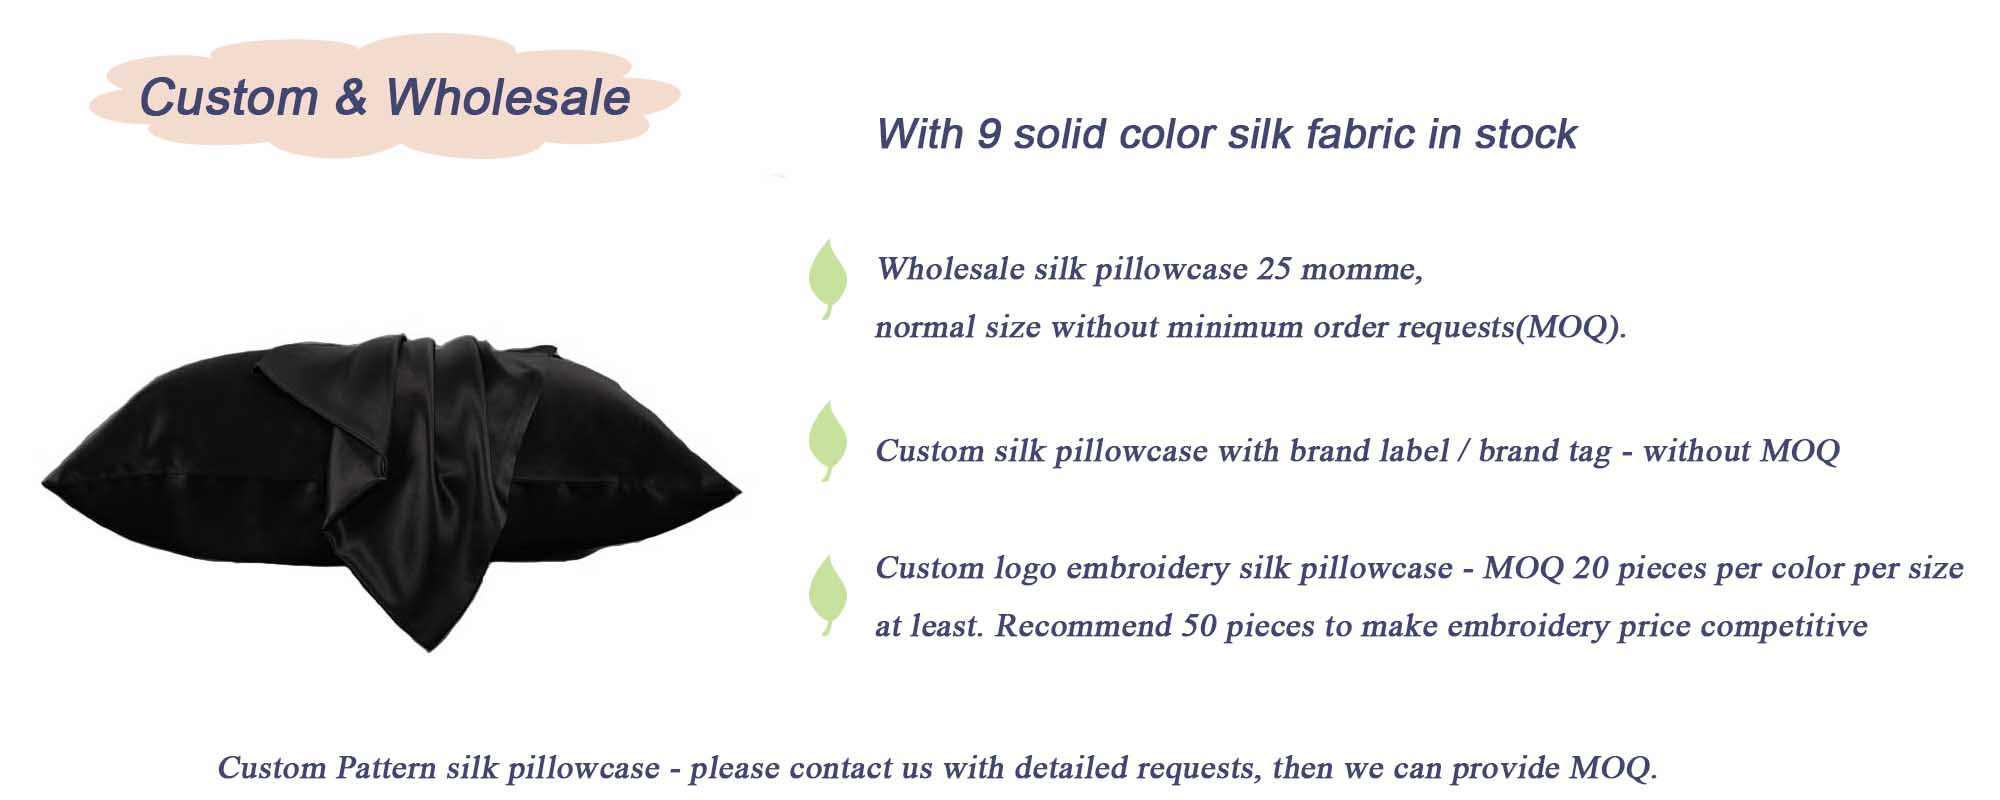 25 Momme silk pillowcase custom and wholesale